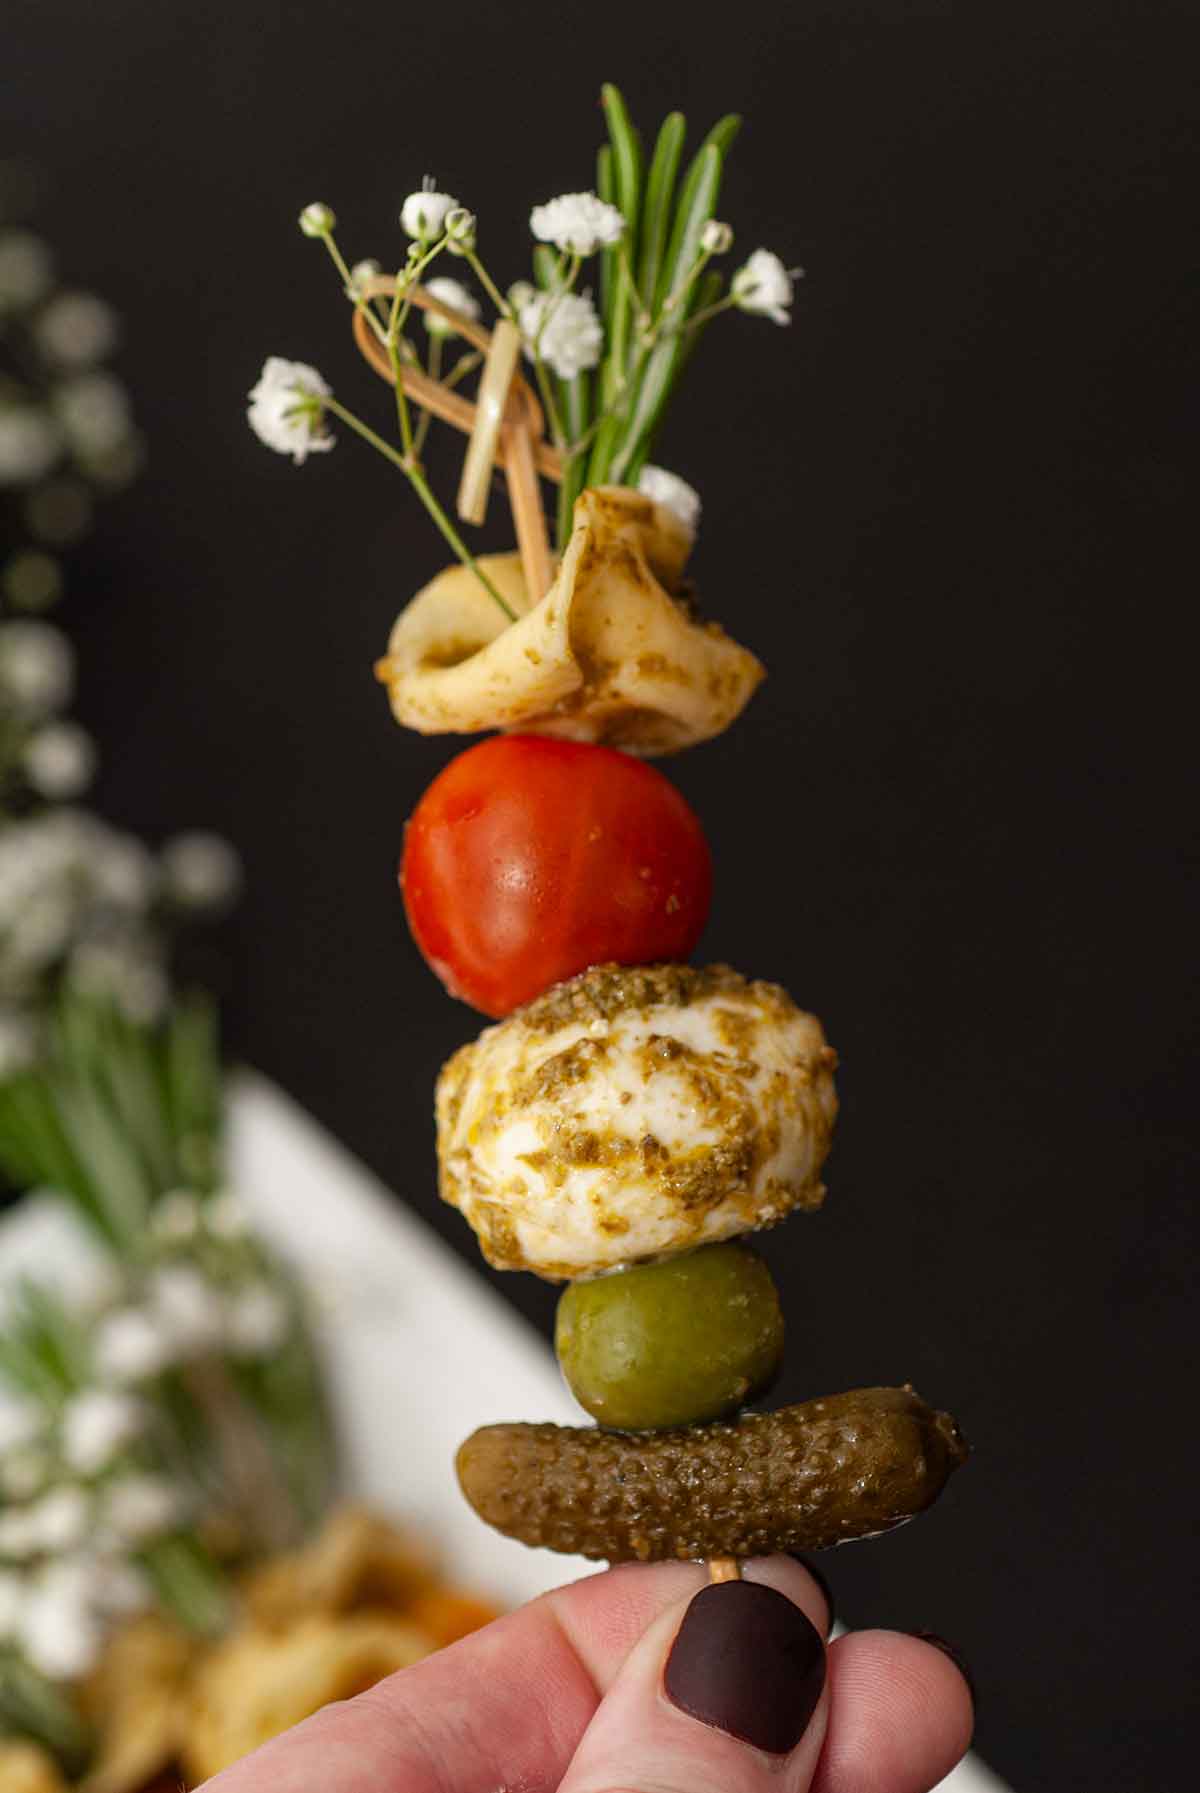 Fingers holding an antipasti skewer garnished with flowers and rosemary.